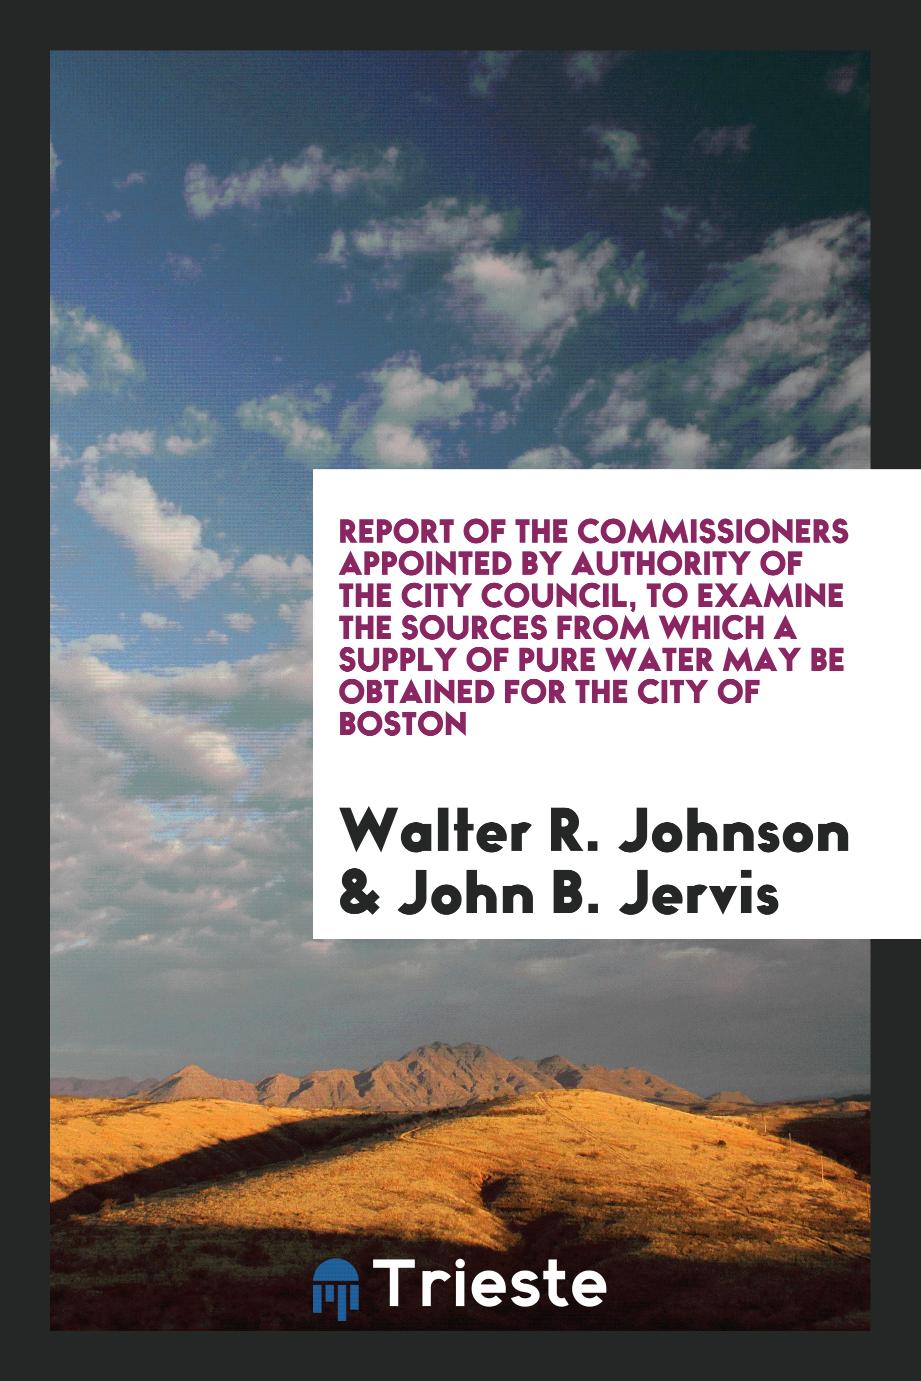 Report of the Commissioners Appointed by Authority of the City Council, to examine the sources from which a supply of pure water may be obtained for the City of Boston